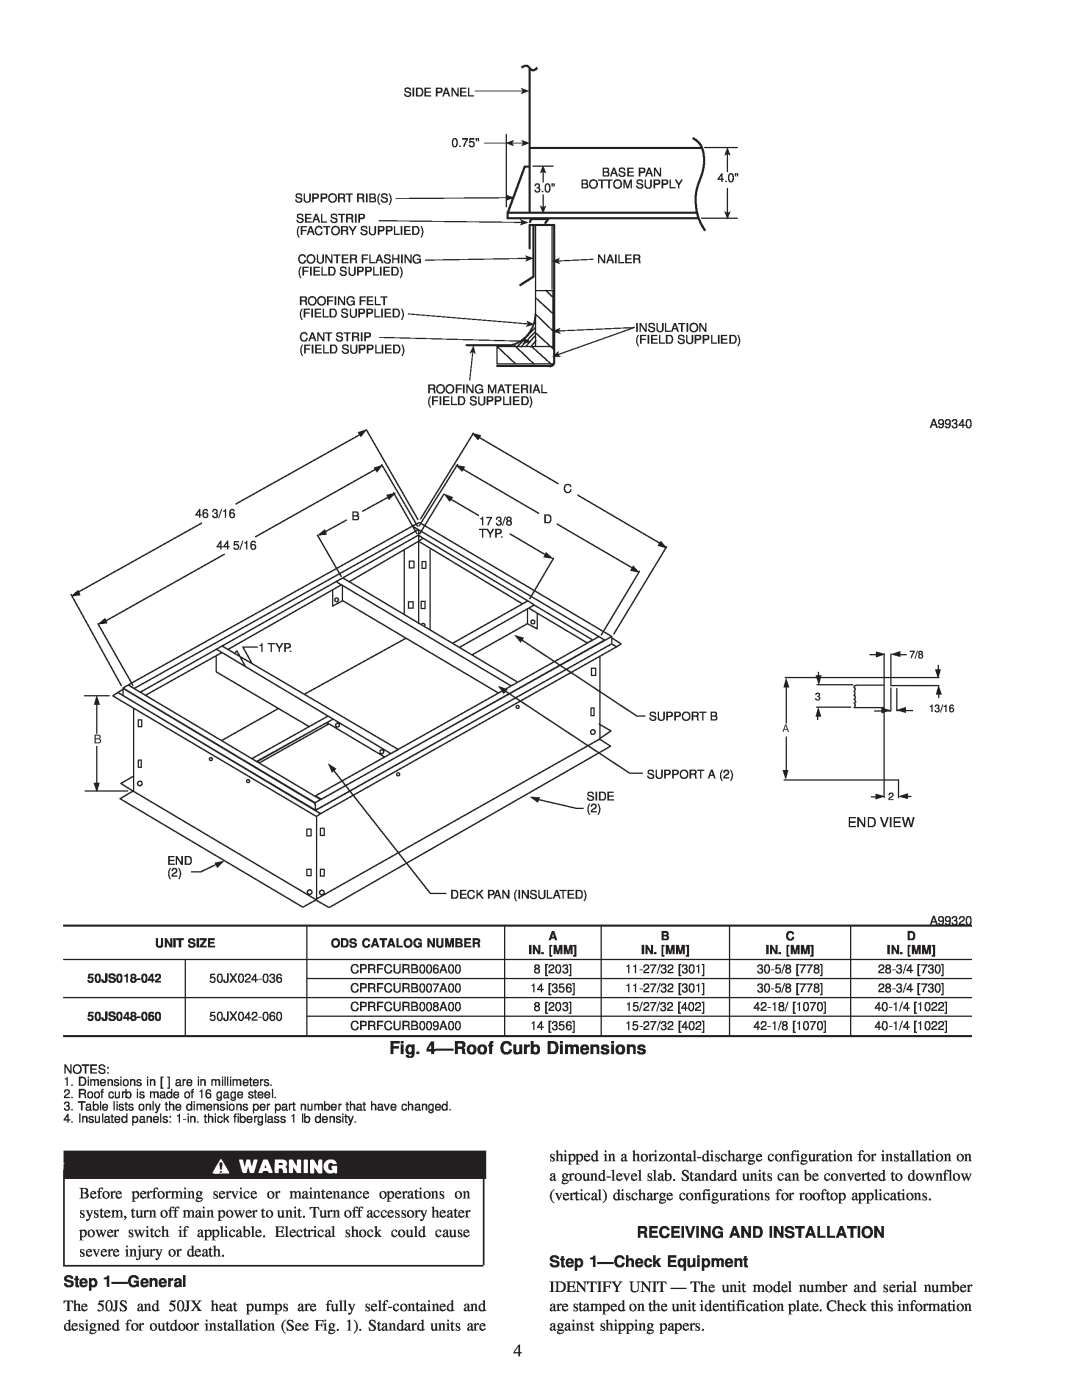 Carrier 50JS instruction manual ÐRoof Curb Dimensions, ÐGeneral, RECEIVING AND INSTALLATION ÐCheck Equipment 